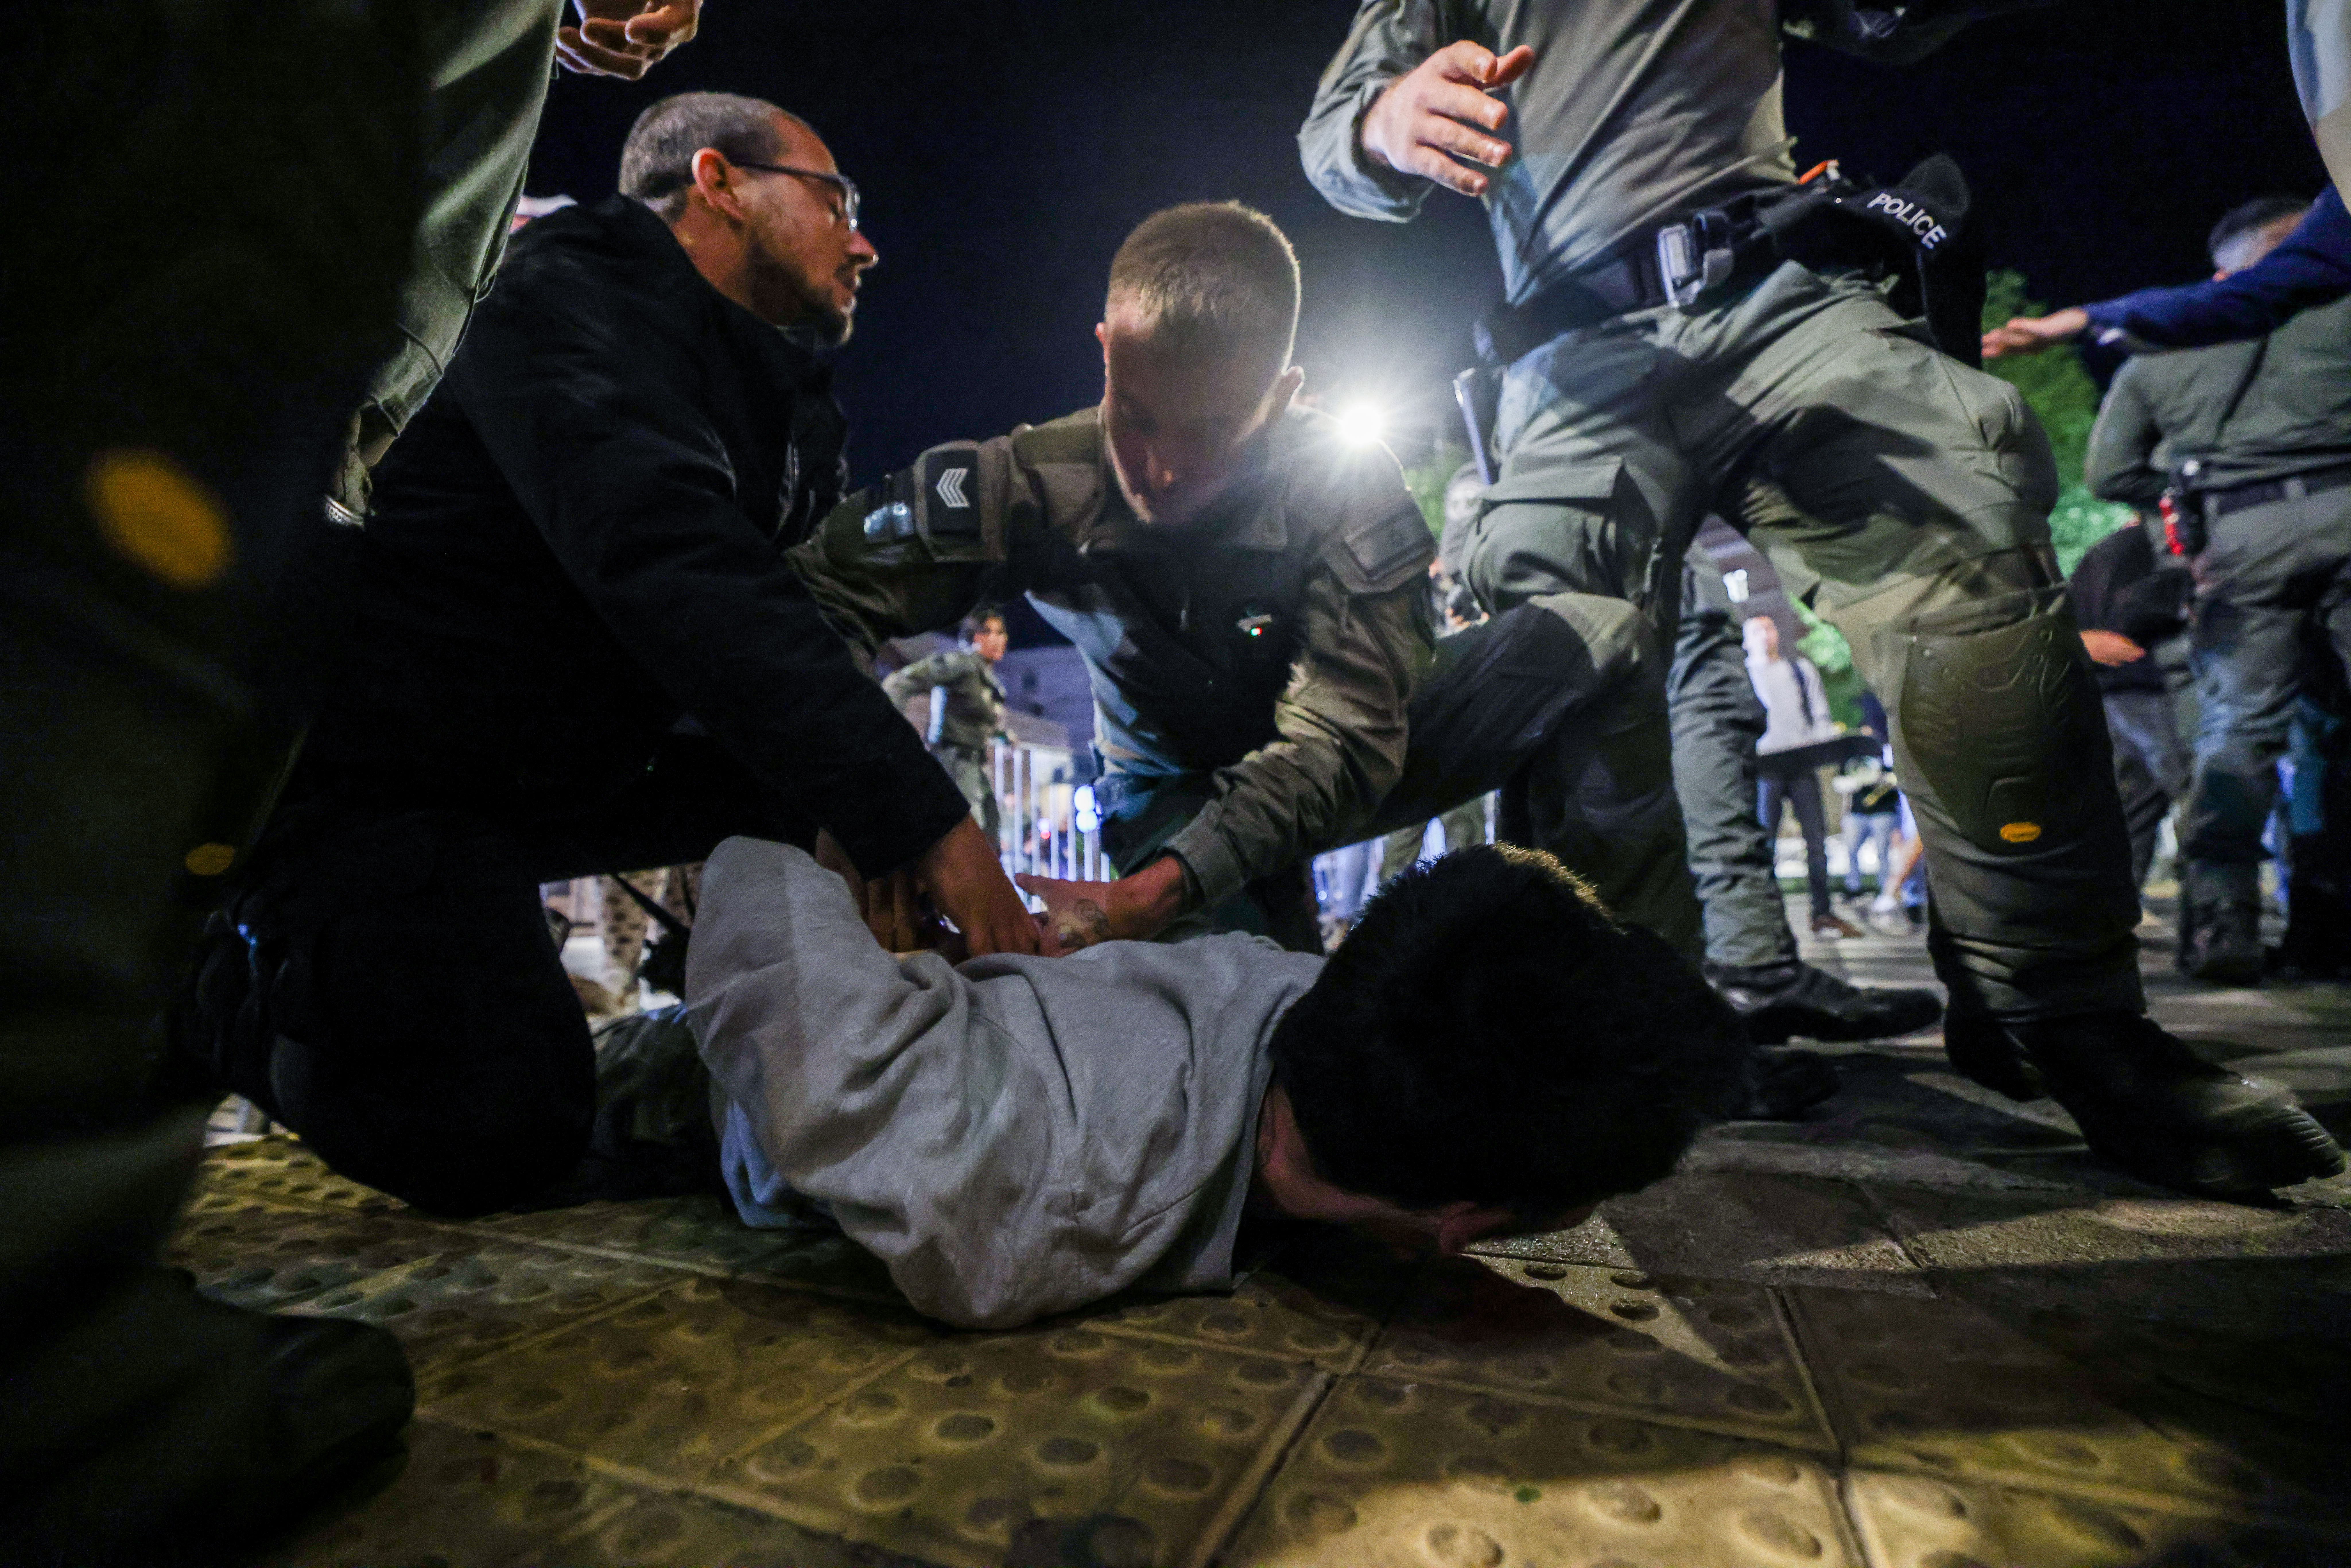 A Rise in Complaints of Police Violence